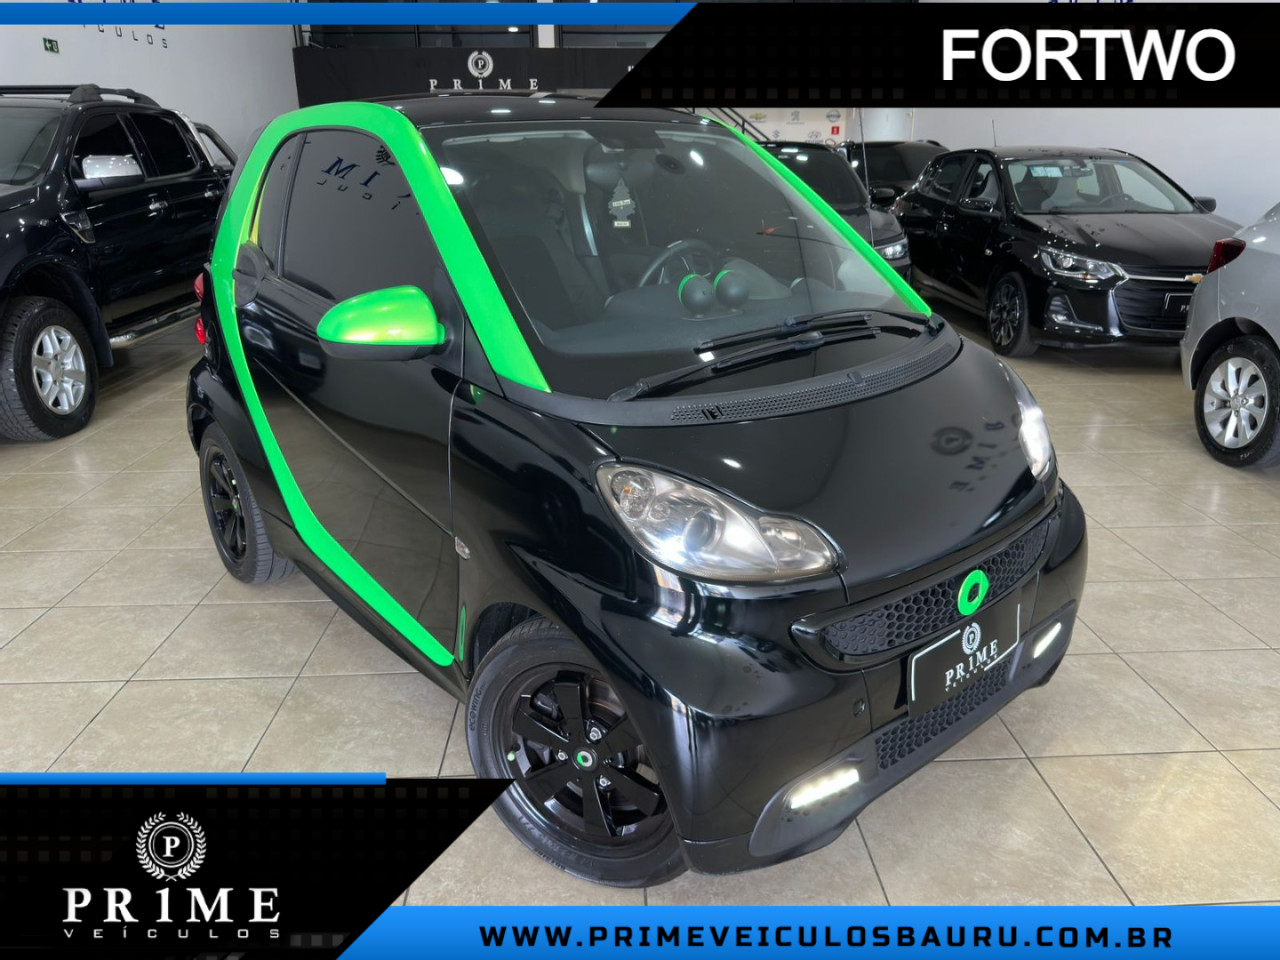 Fortwo 1.0 MHD COUPÉ 3 CILINDROS AUTOMÁTICO